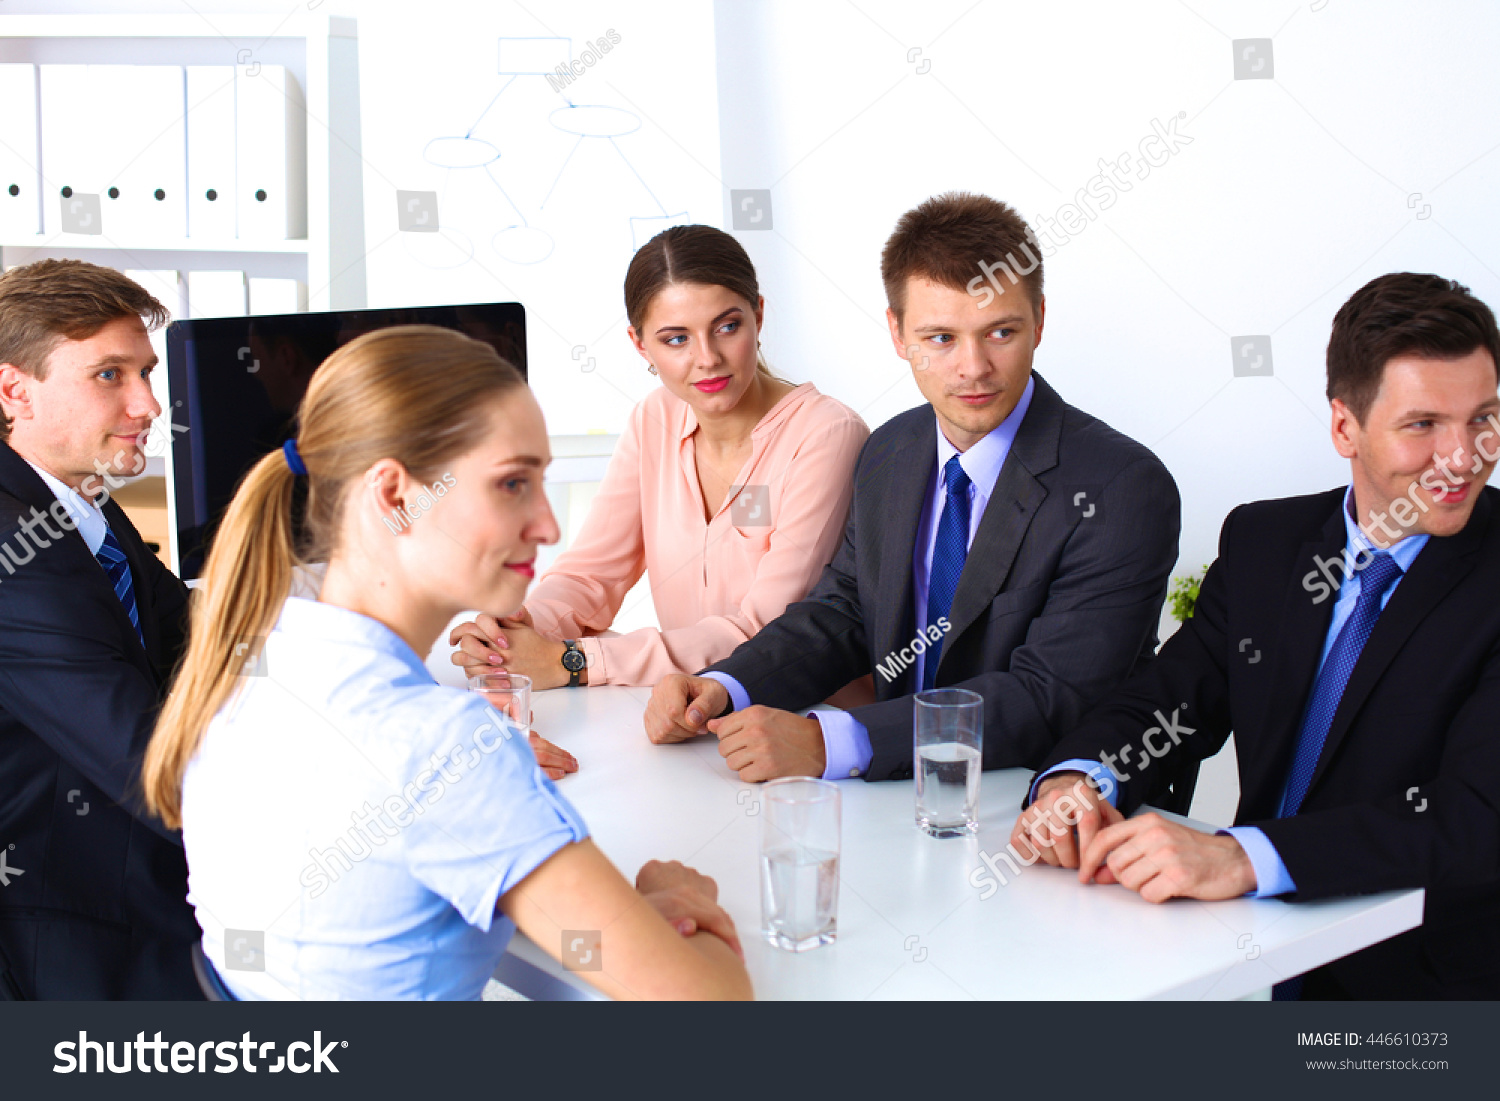 Business meeting - manager discussing work with his colleagues #446610373